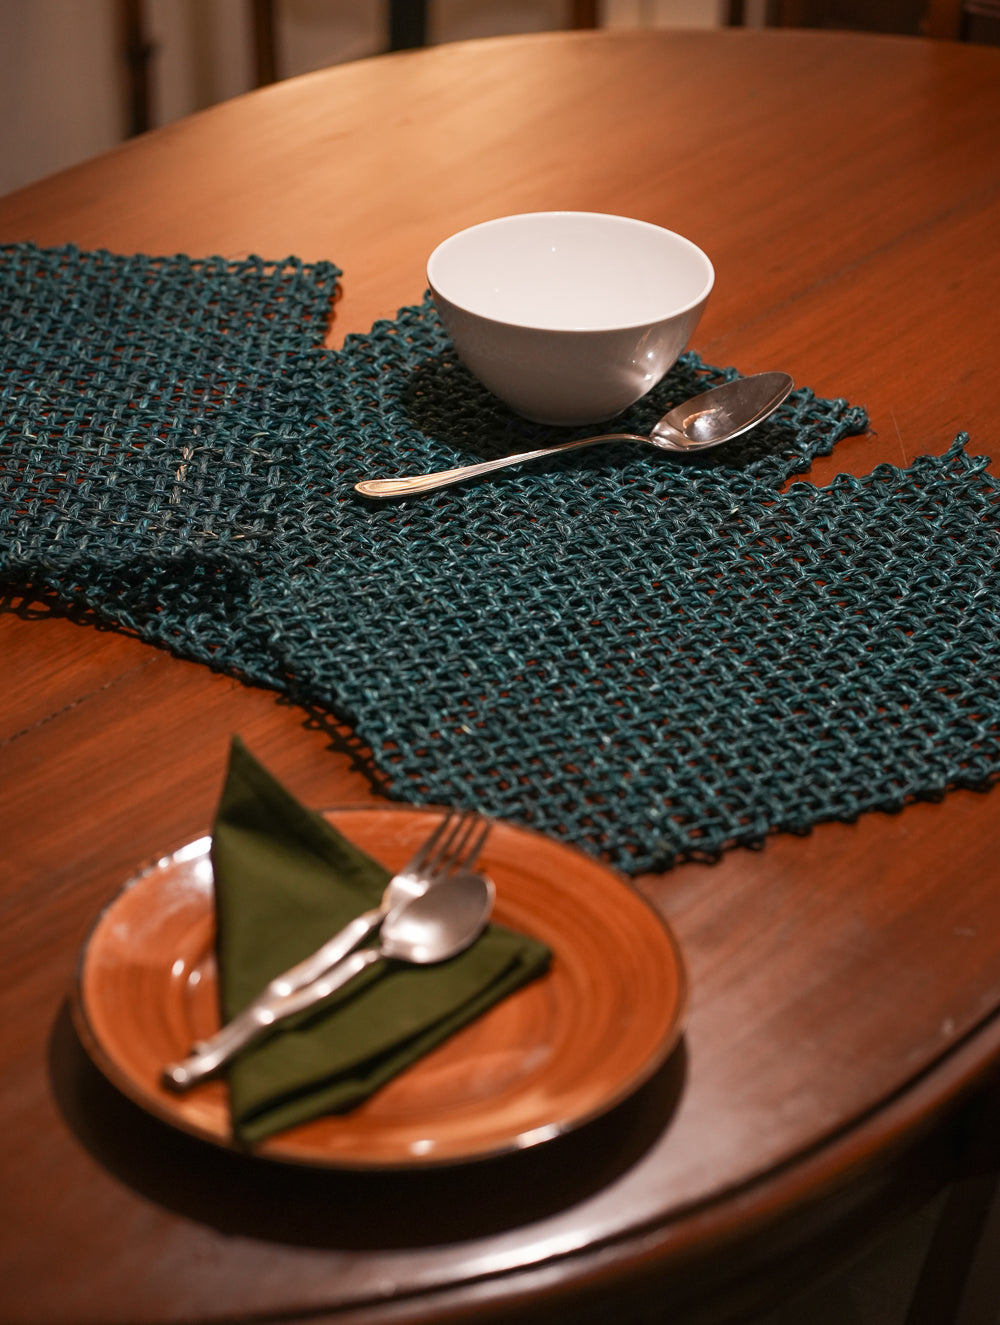 Load image into Gallery viewer, Handcrafted Sabai Grass Table Mats - (Set of 3)